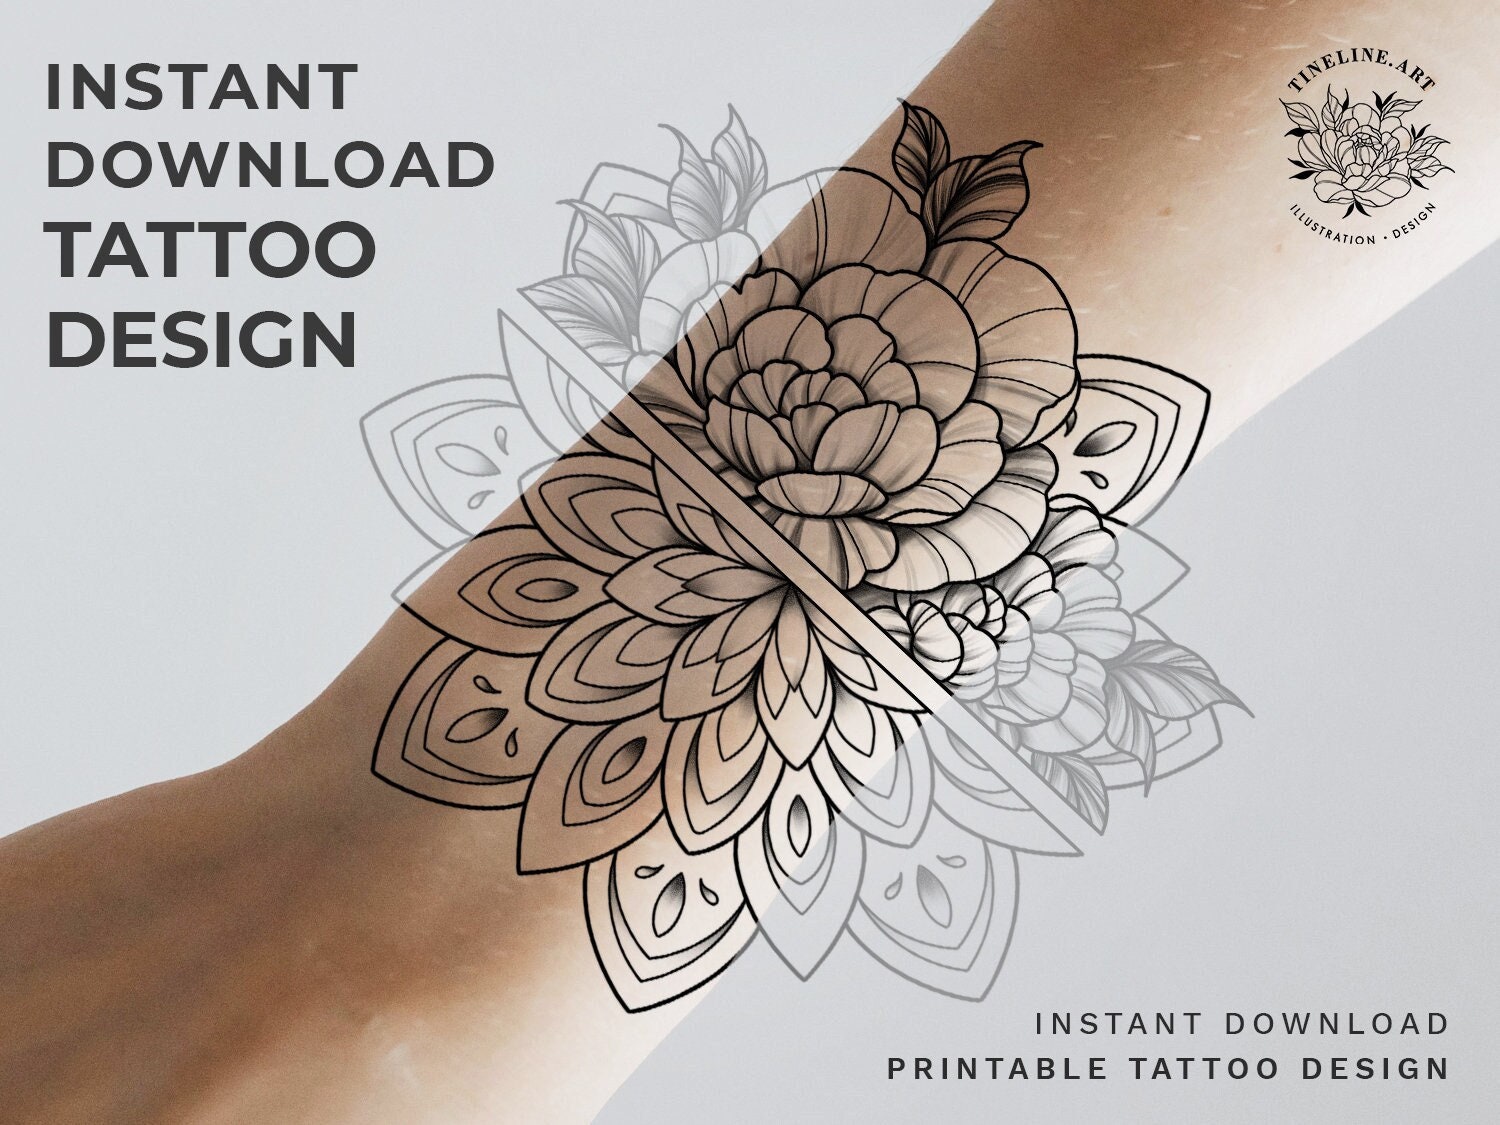 Instant Download Tattoo Design Rose and Mandala Tattoo Printable Stencil  Template - Etsy